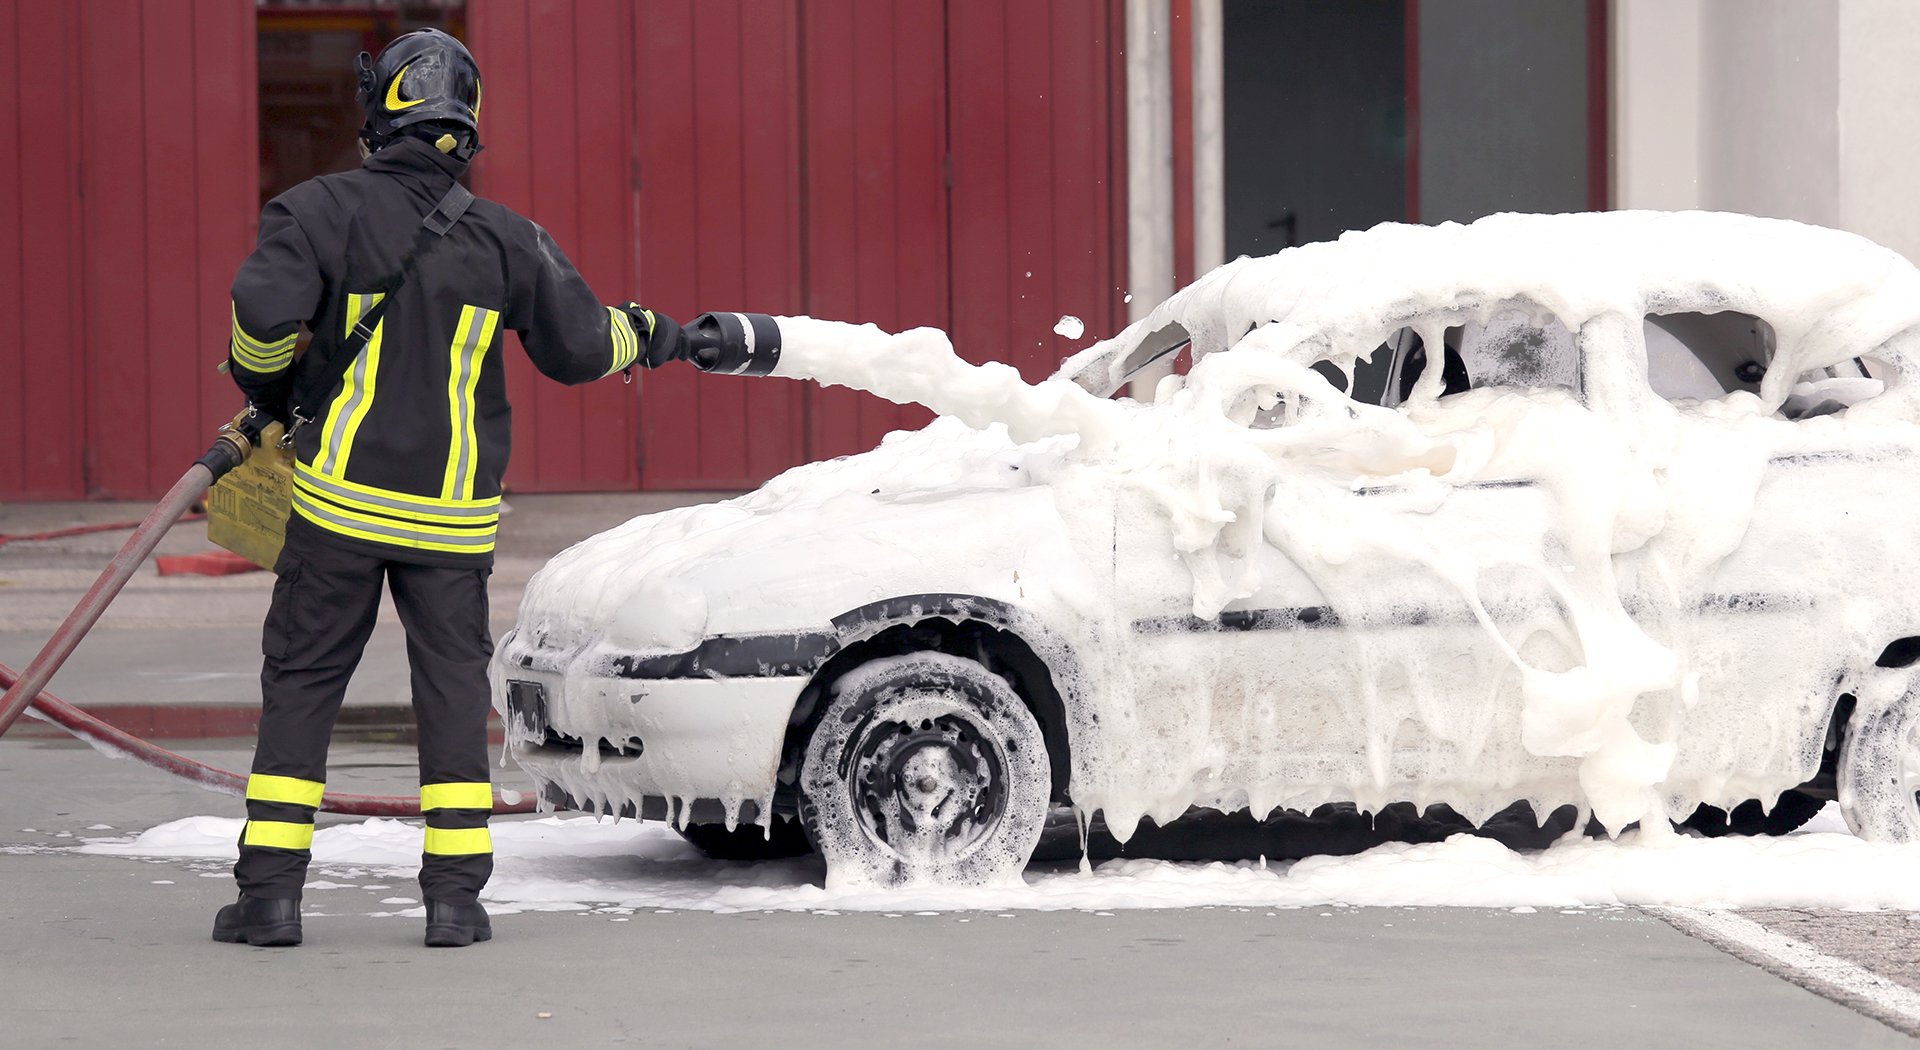 Foam from fire extinguisher. 